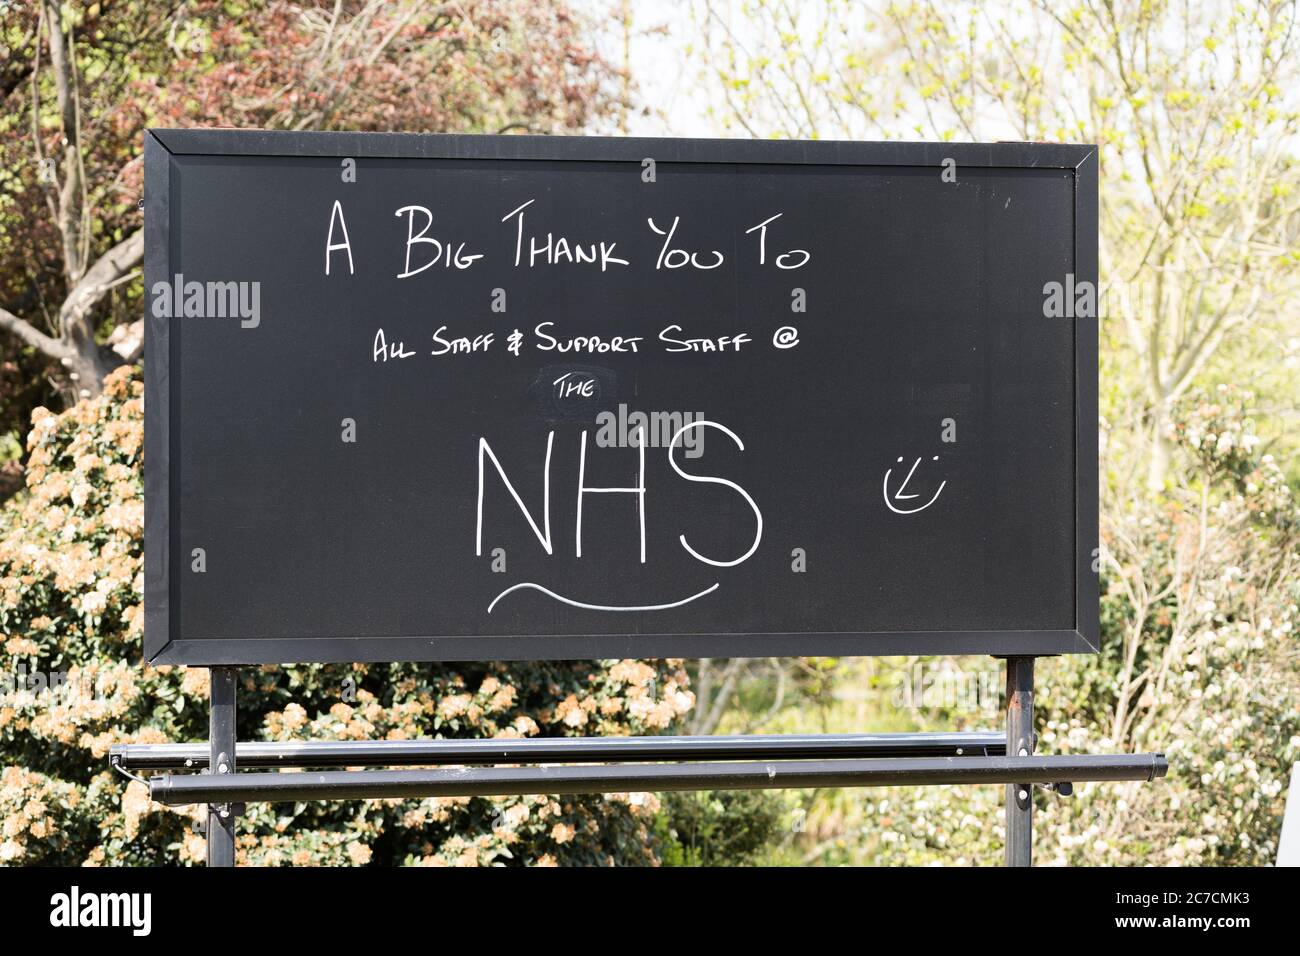 London, UK - April 12 2020: Beautiful black sign with white letters saying" A big thank you to NHS" during coronavirus lockdown Stock Photo